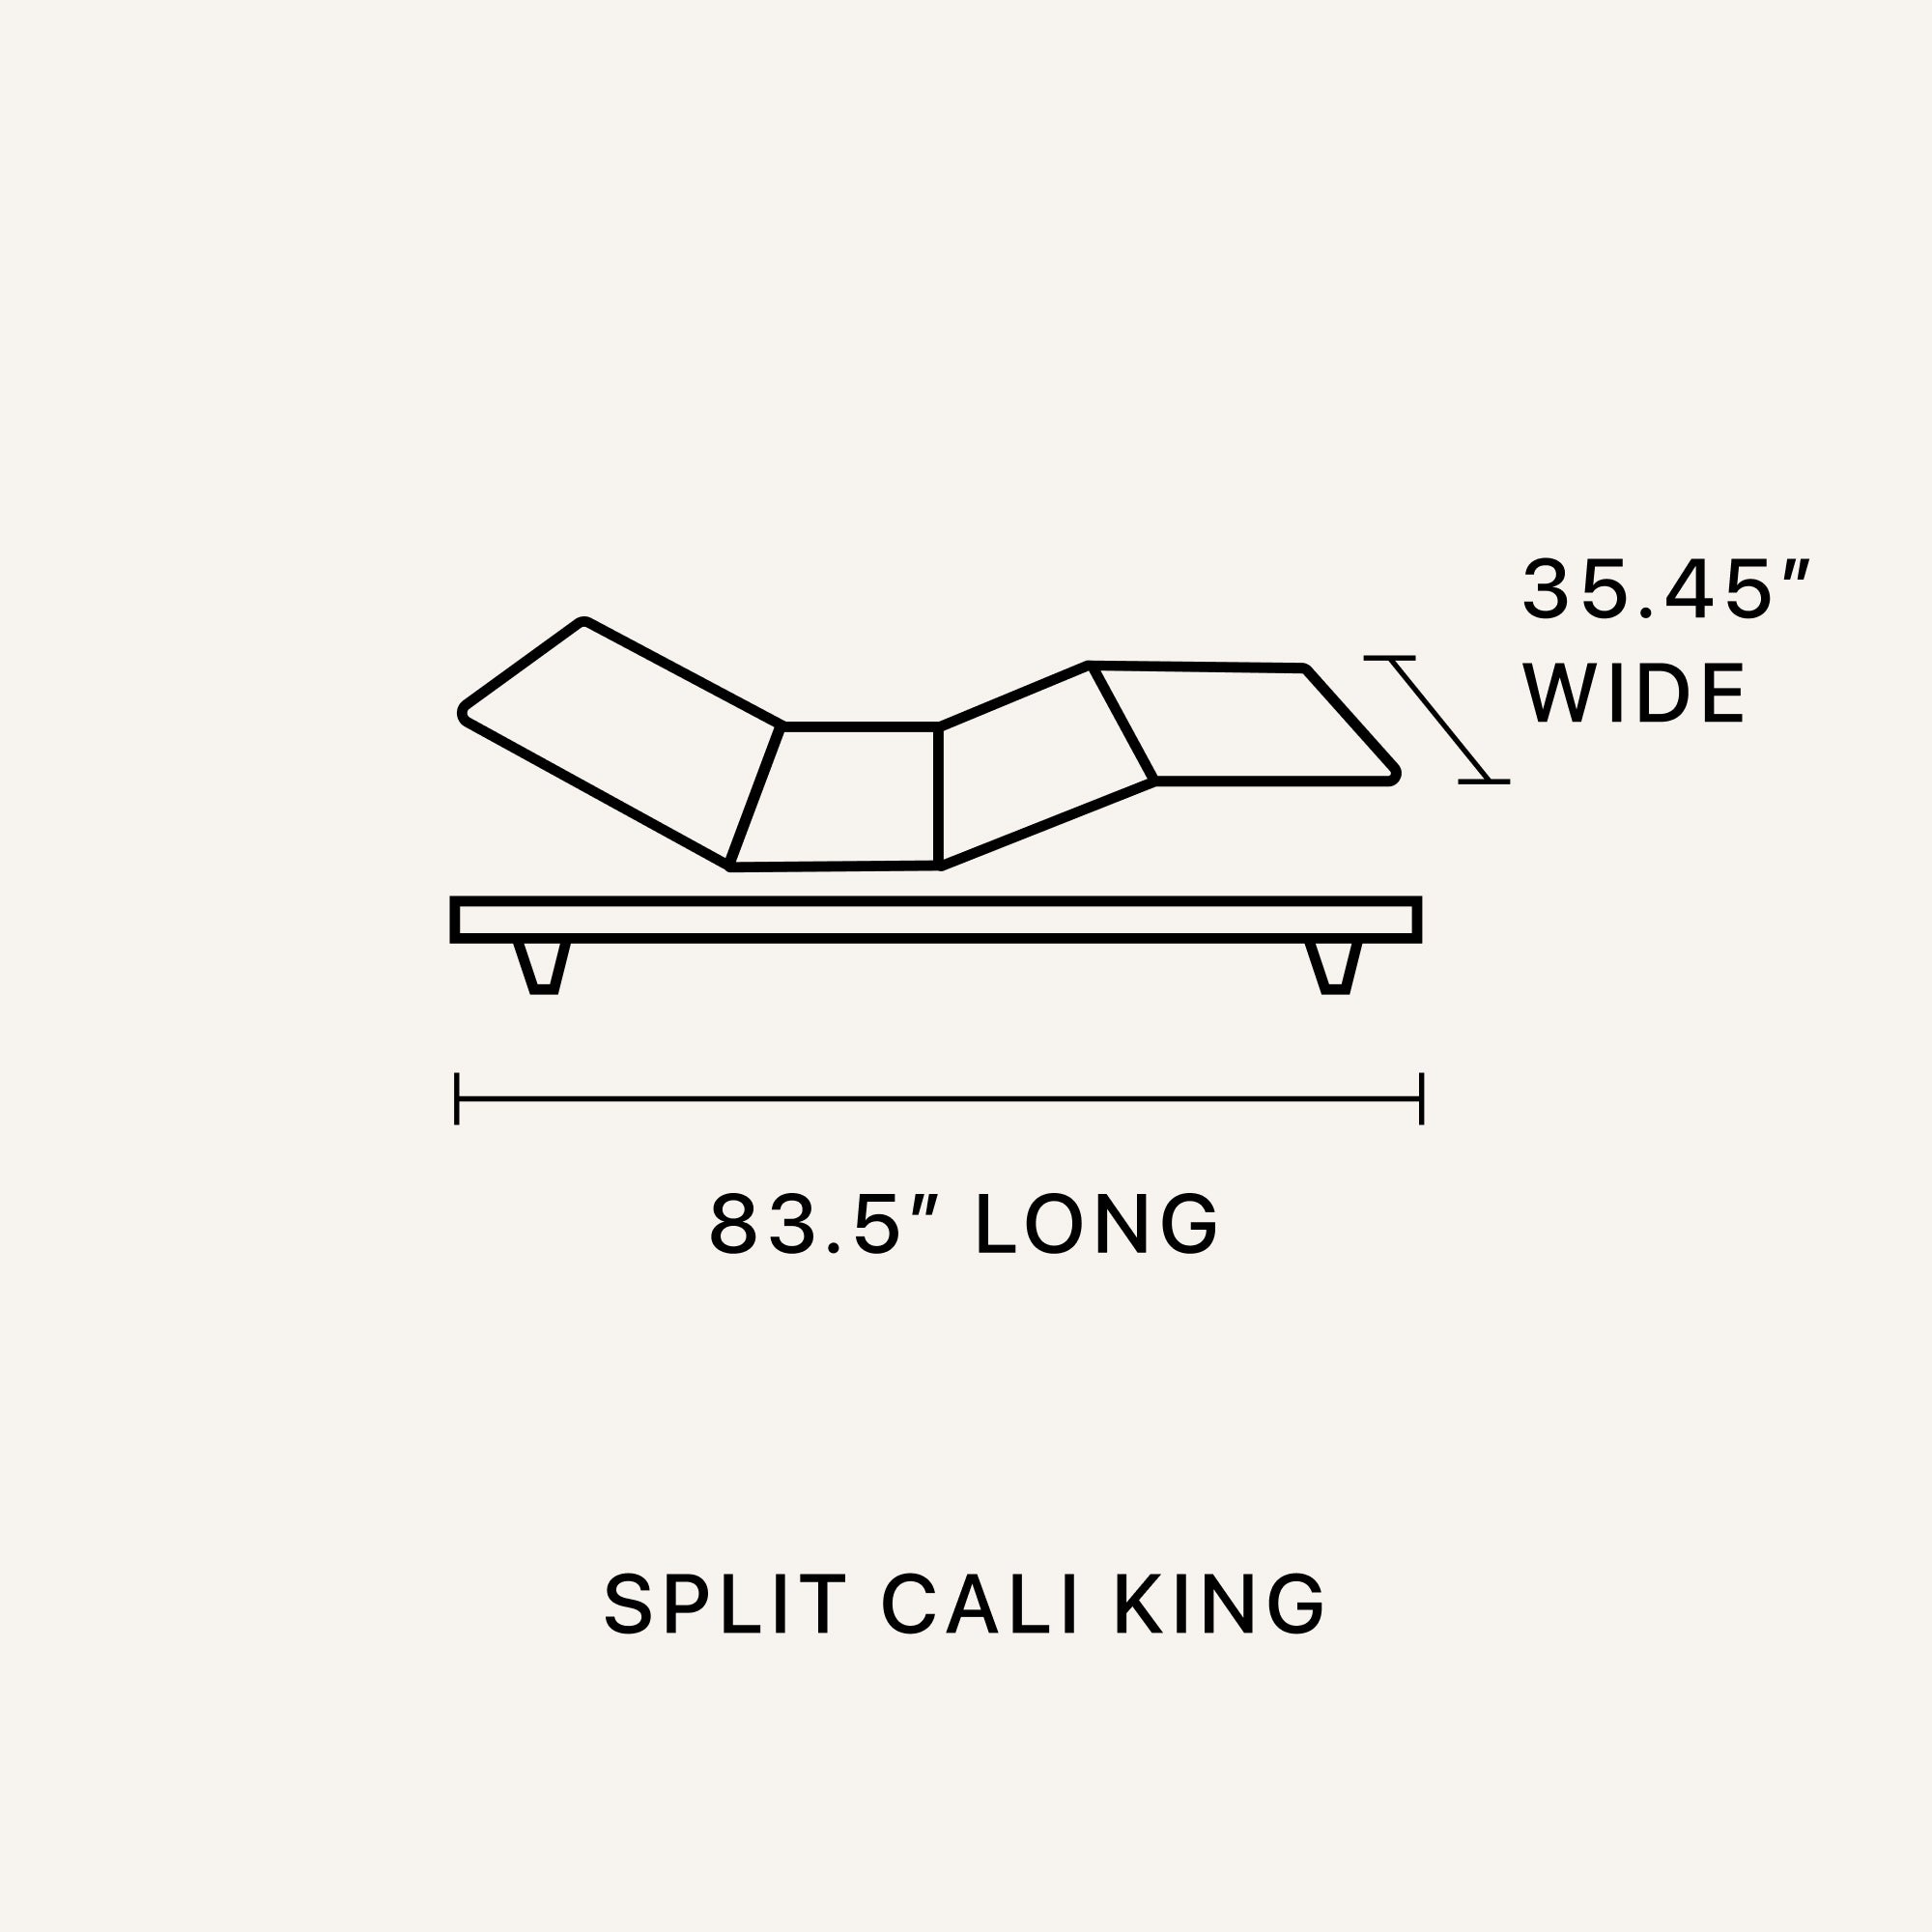 Split Cali King size diagram chart of the Motion Restore Base   35.45 inches wide and 83.5 inches long || size:  Split Cal King